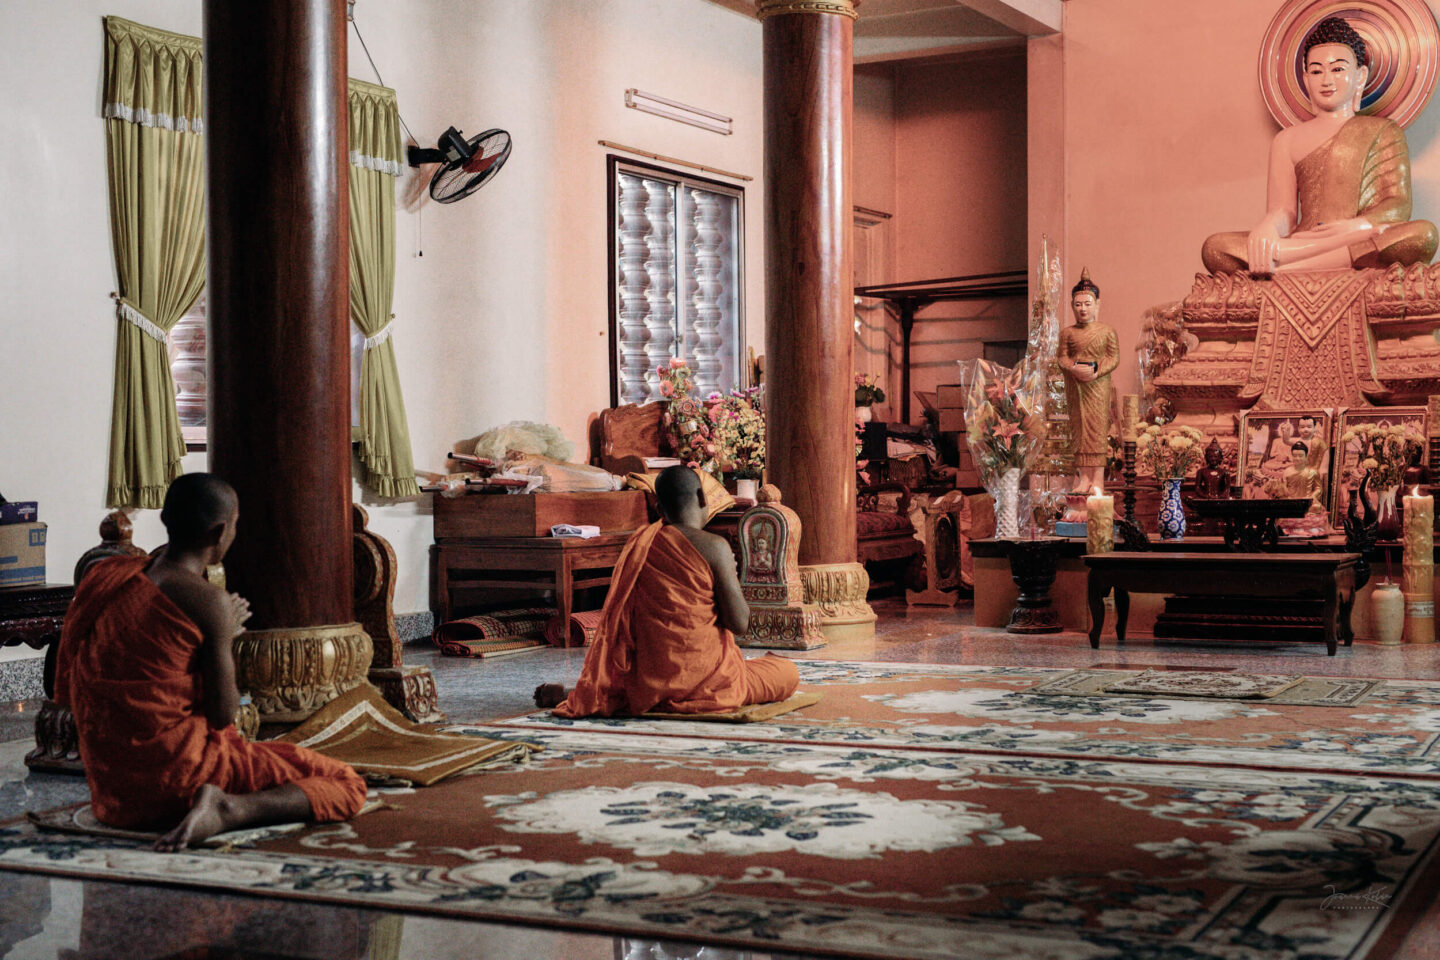 Theravada Buddhist monks pray in a Khmer temple in Tra Vinh province, Southern Vietnam.